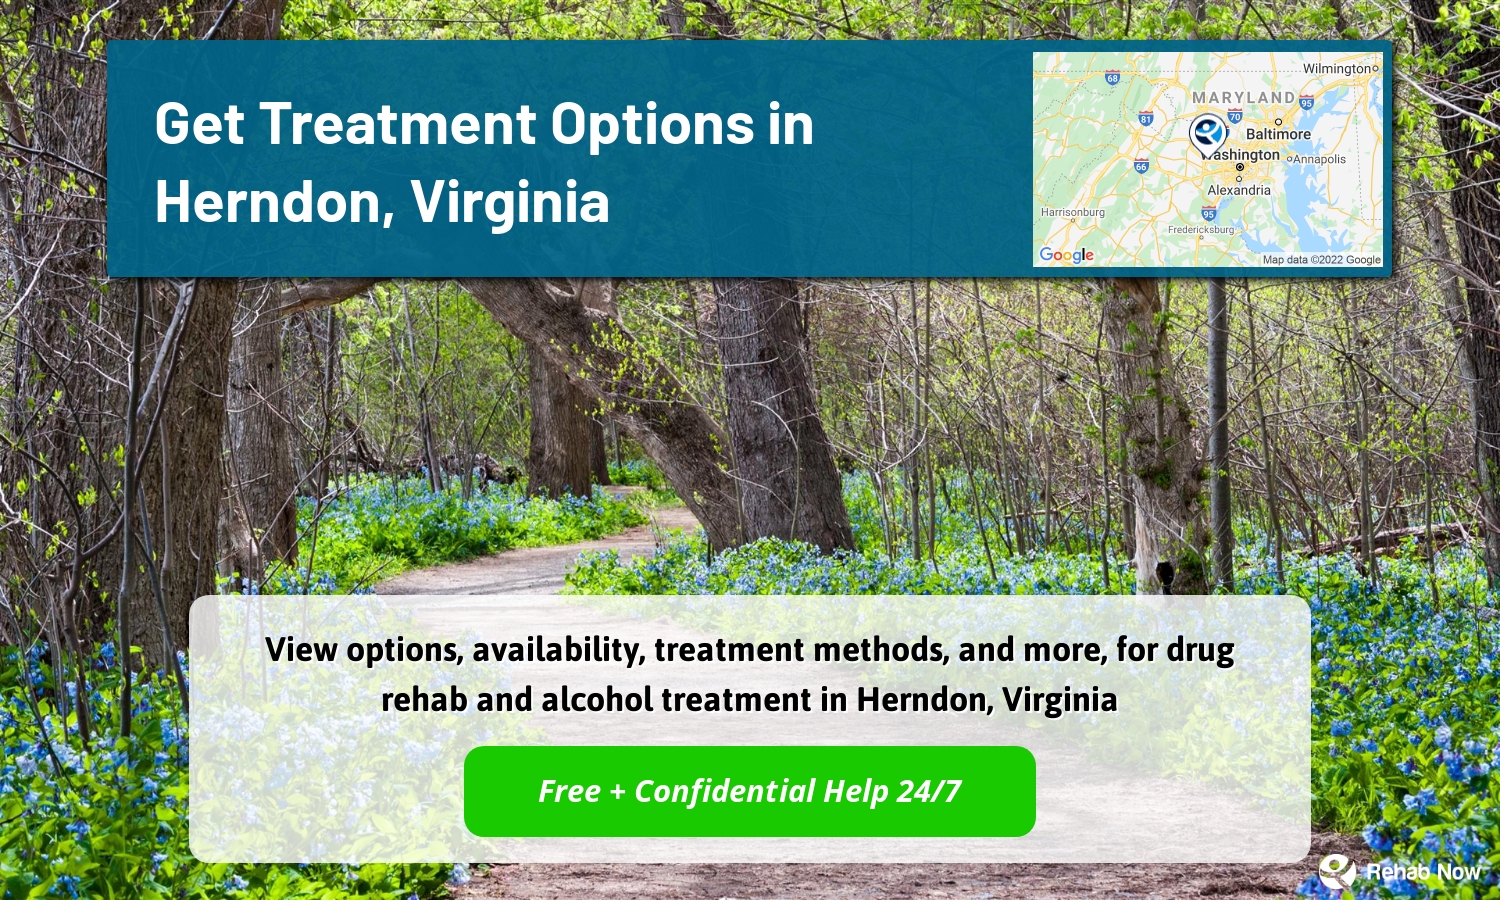 View options, availability, treatment methods, and more, for drug rehab and alcohol treatment in Herndon, Virginia